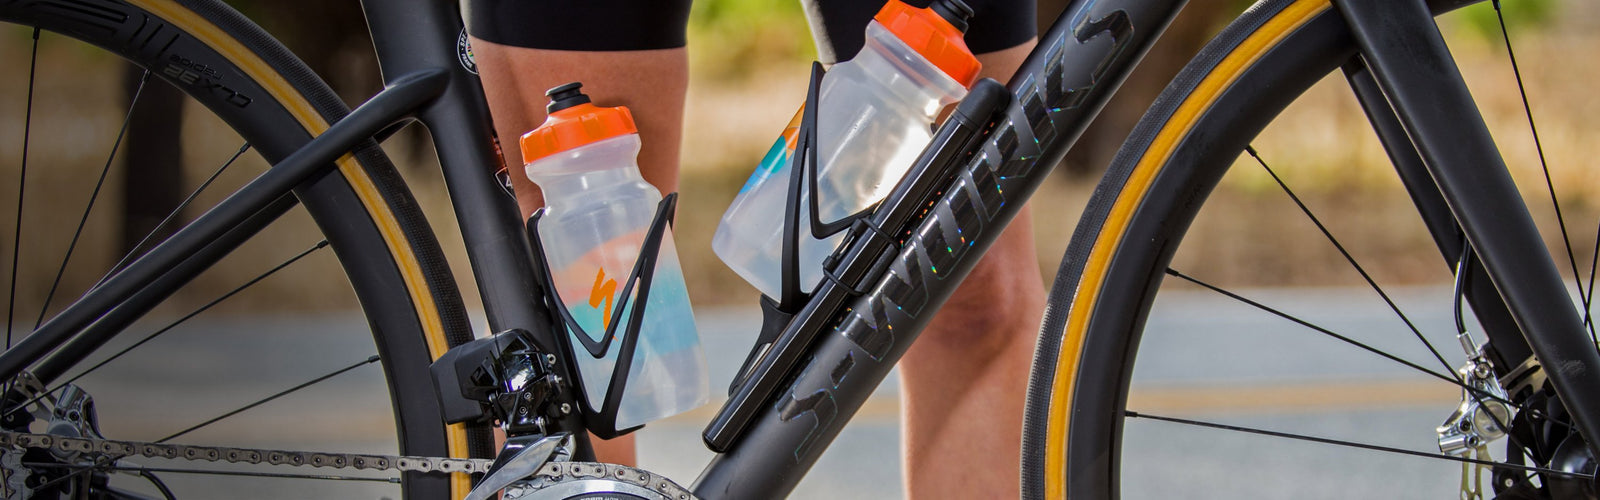 specialized swat water bottle cage